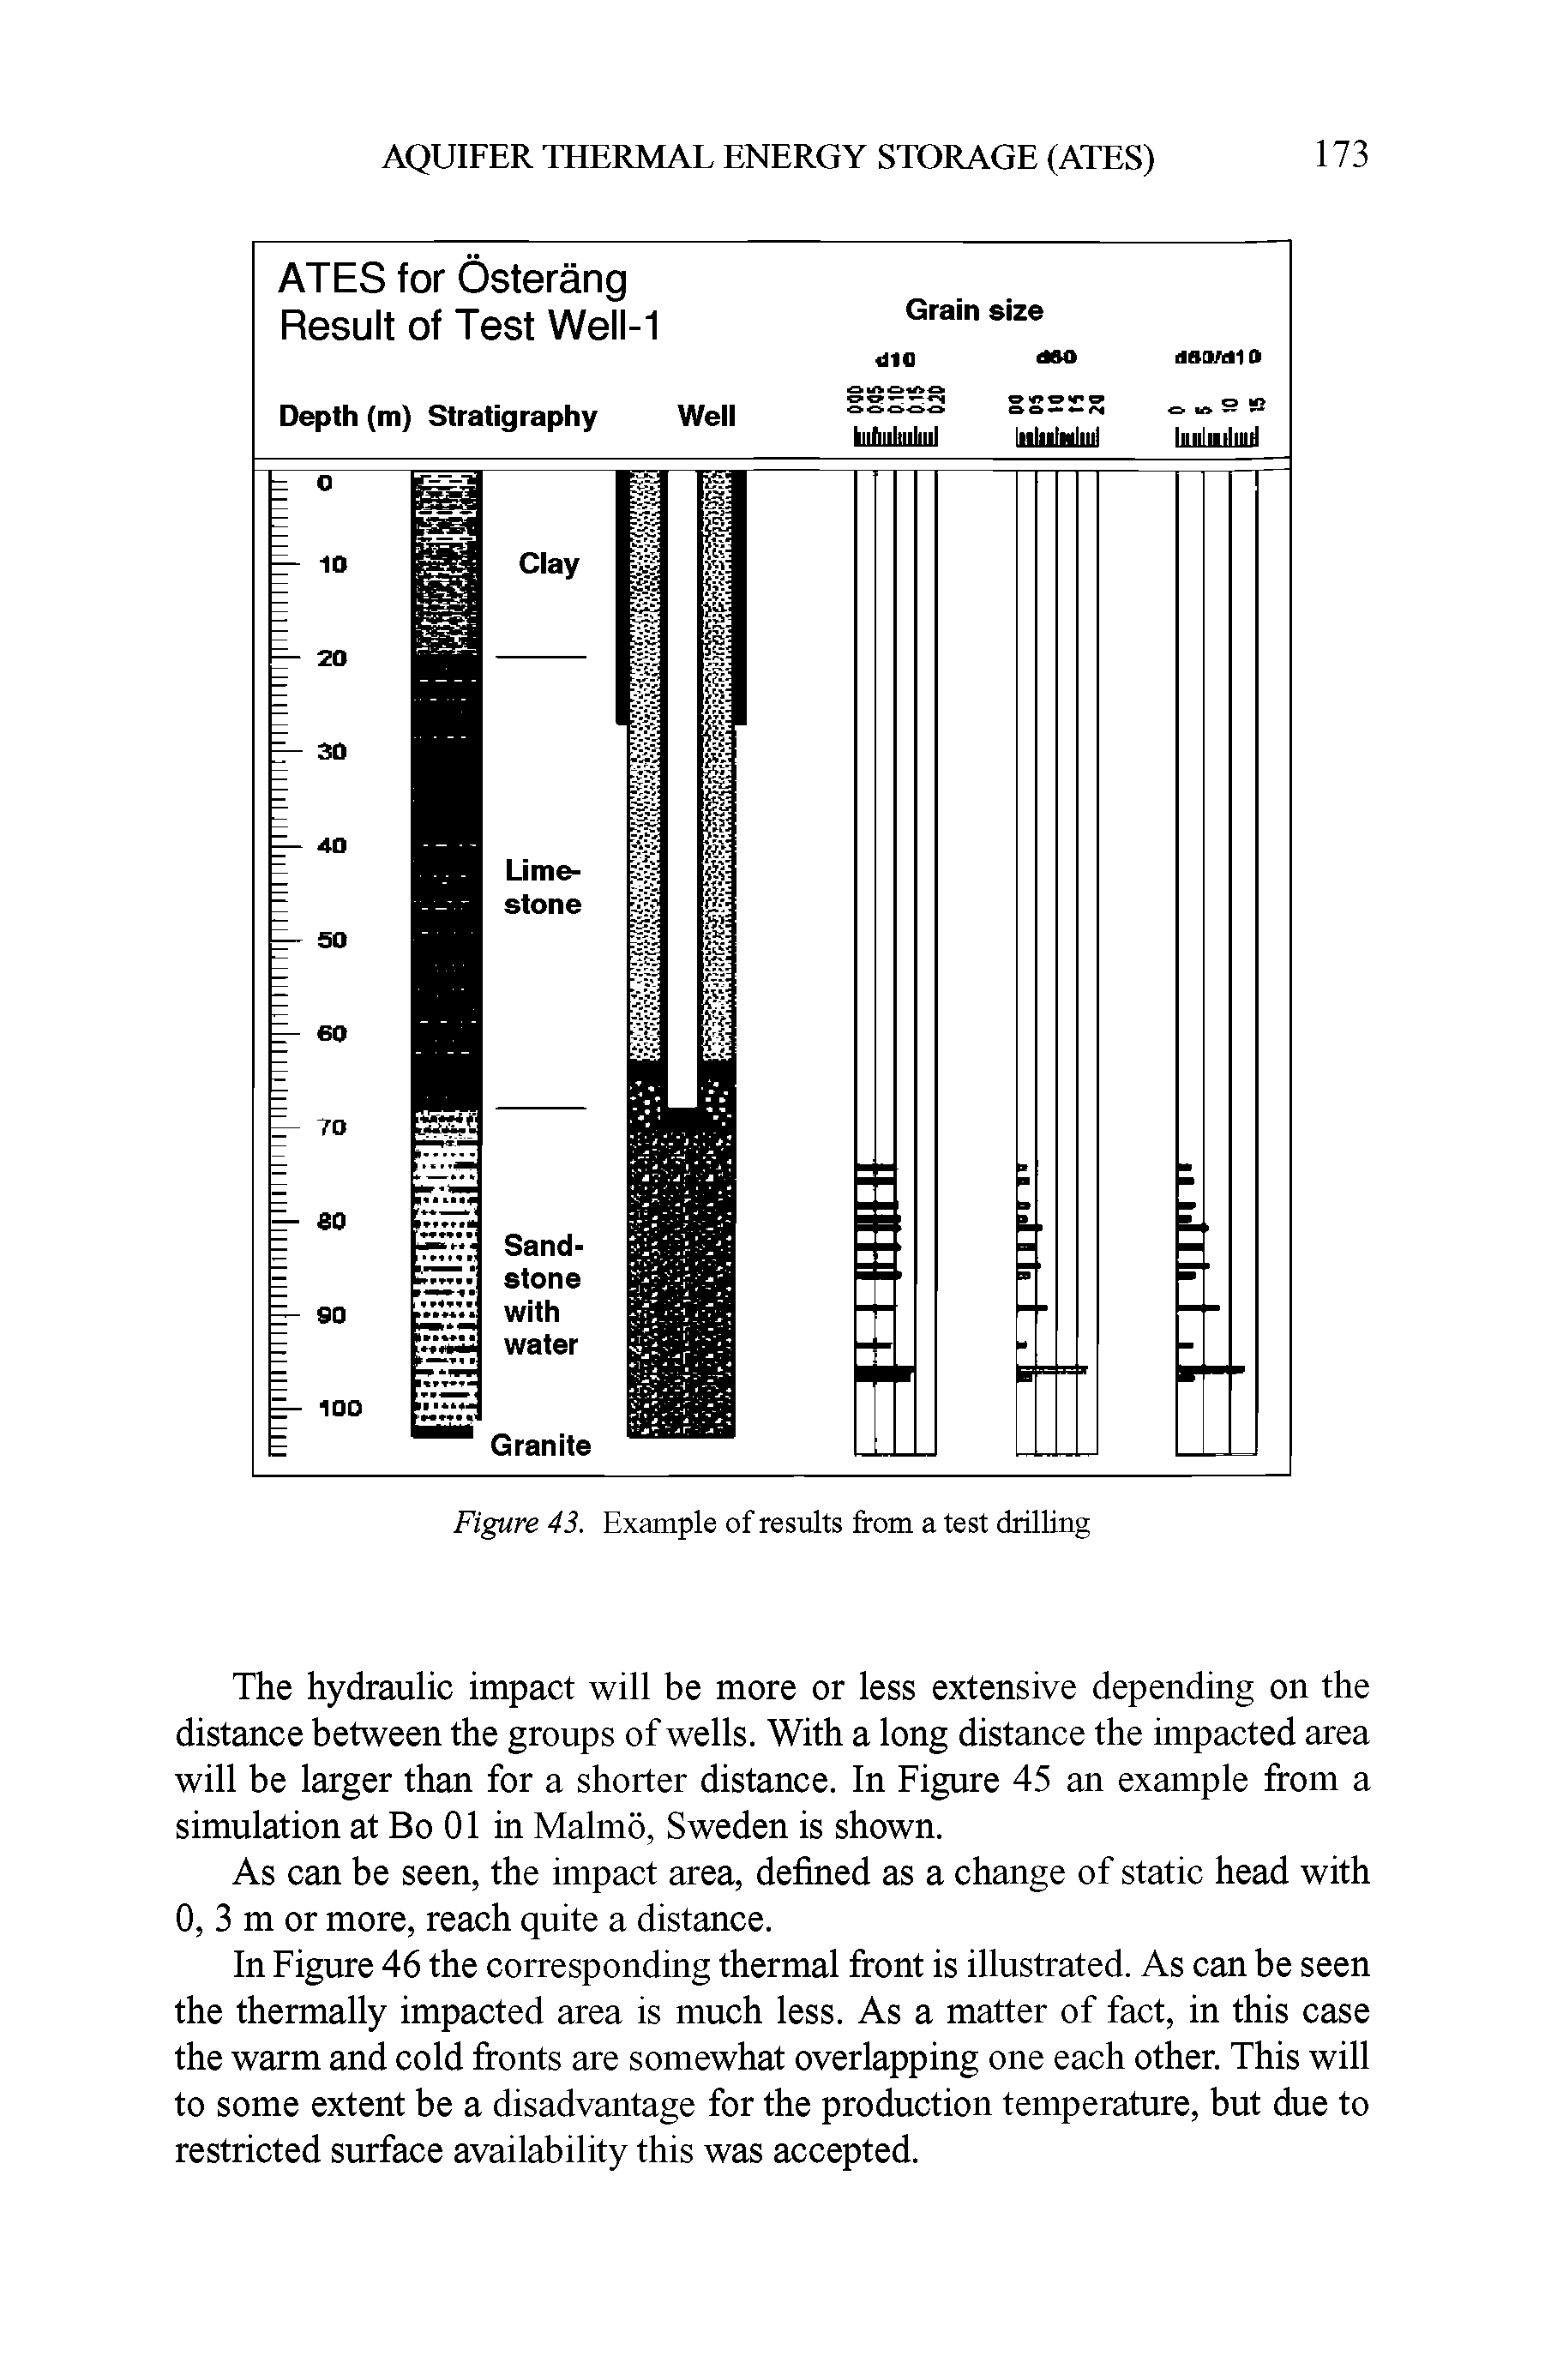 Figure 43. Example of results from a test drilling...